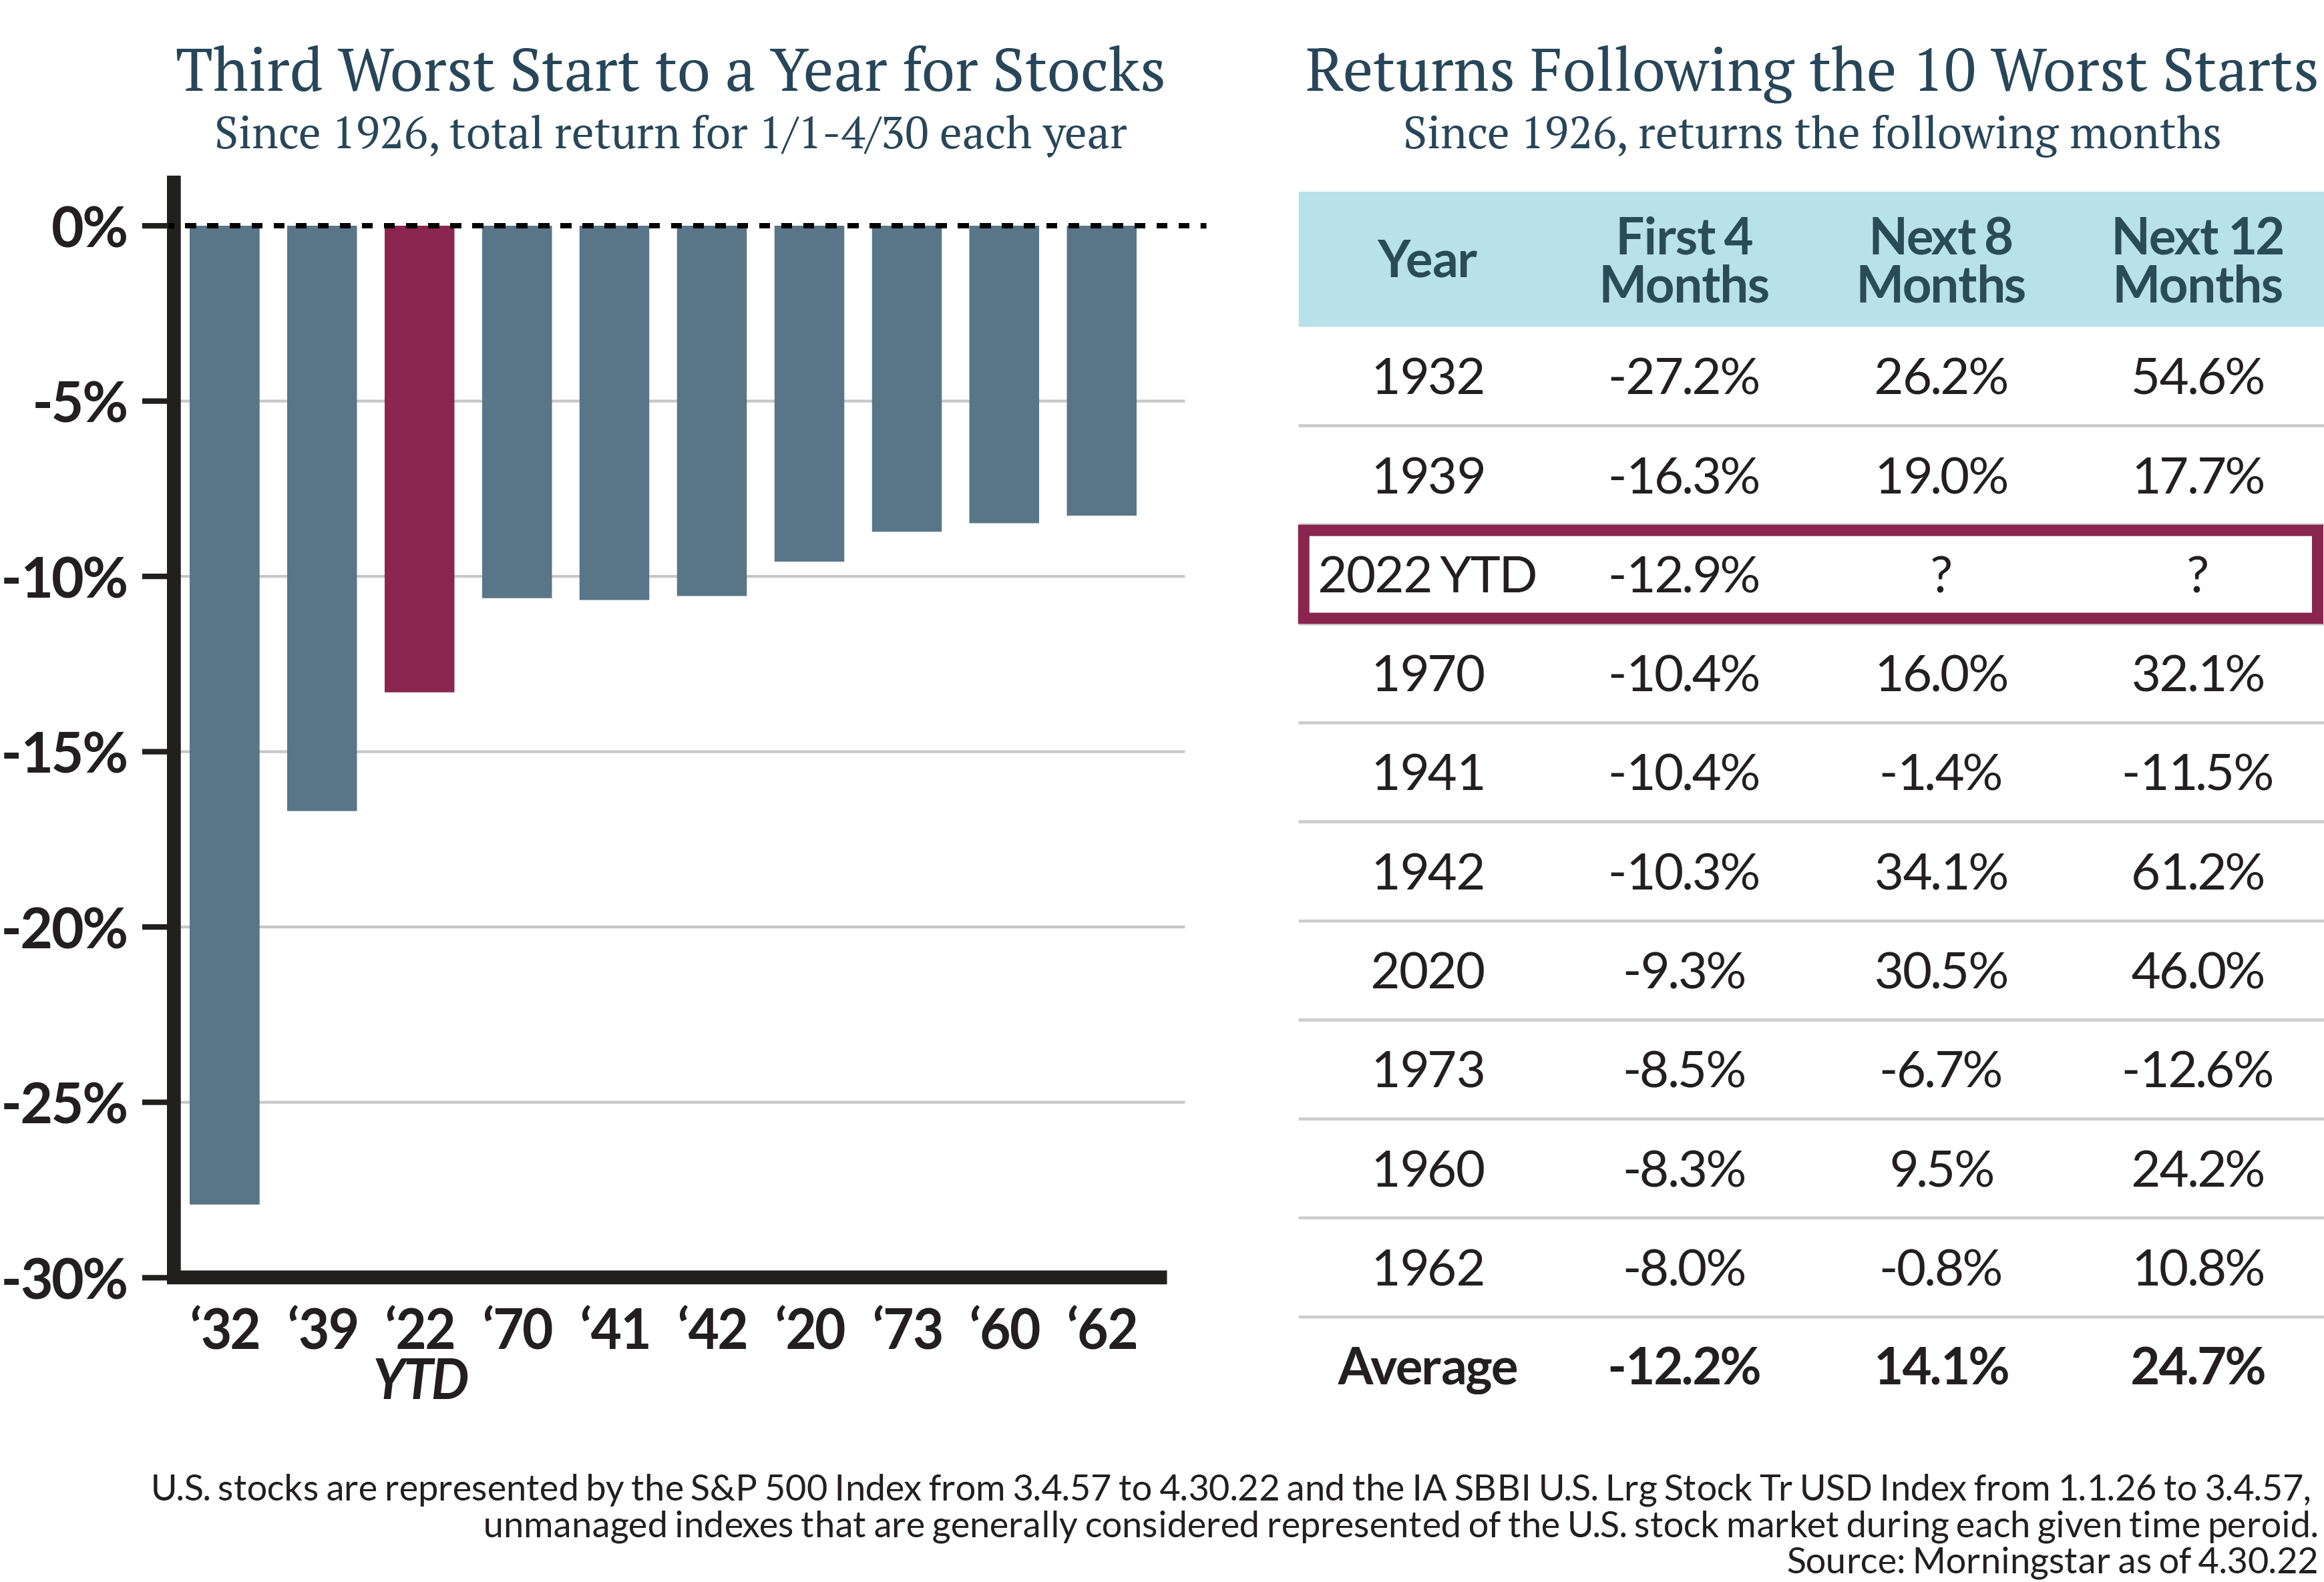 A long-term perspective is essential to consider when evaluating where things stand. U.S. stock performance during the first four months of 2022 ranks as the third worst on record, but as the graphic demonstrates, performance following prior instances of severe market pullbacks has often been strong.